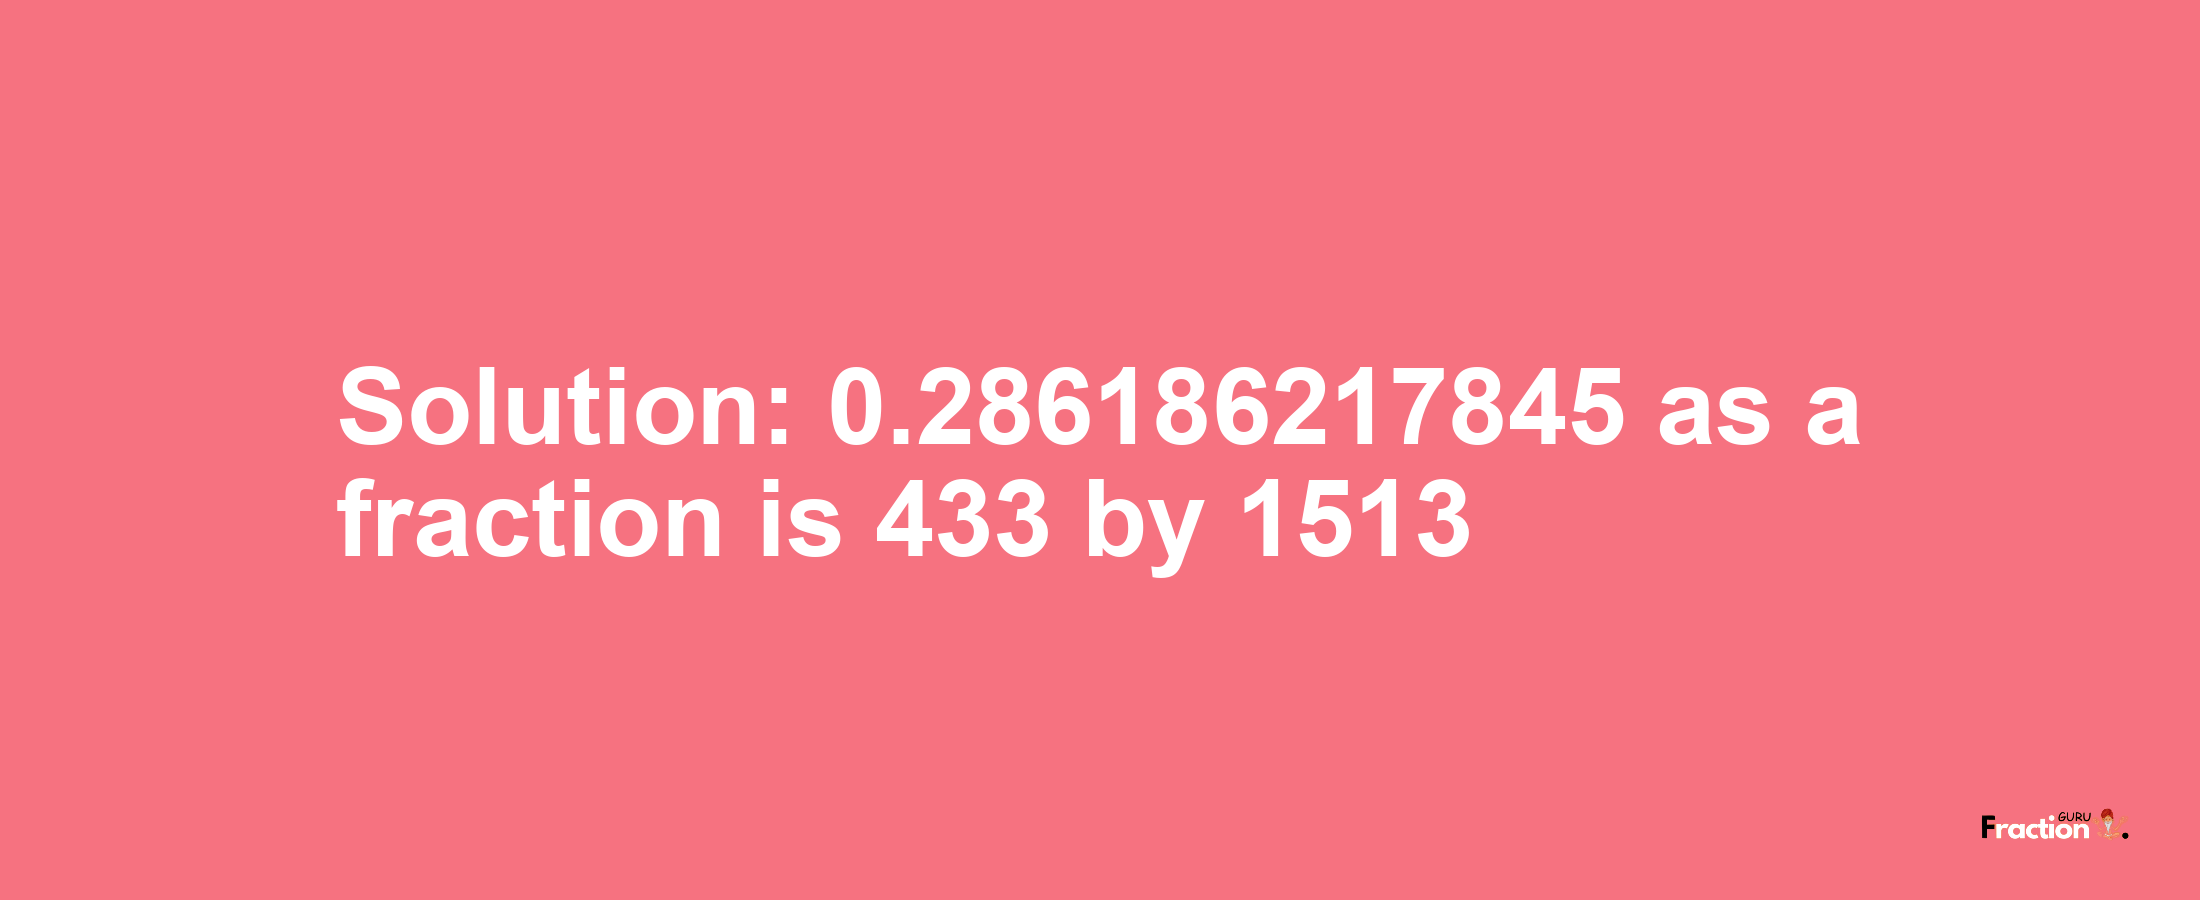 Solution:0.286186217845 as a fraction is 433/1513